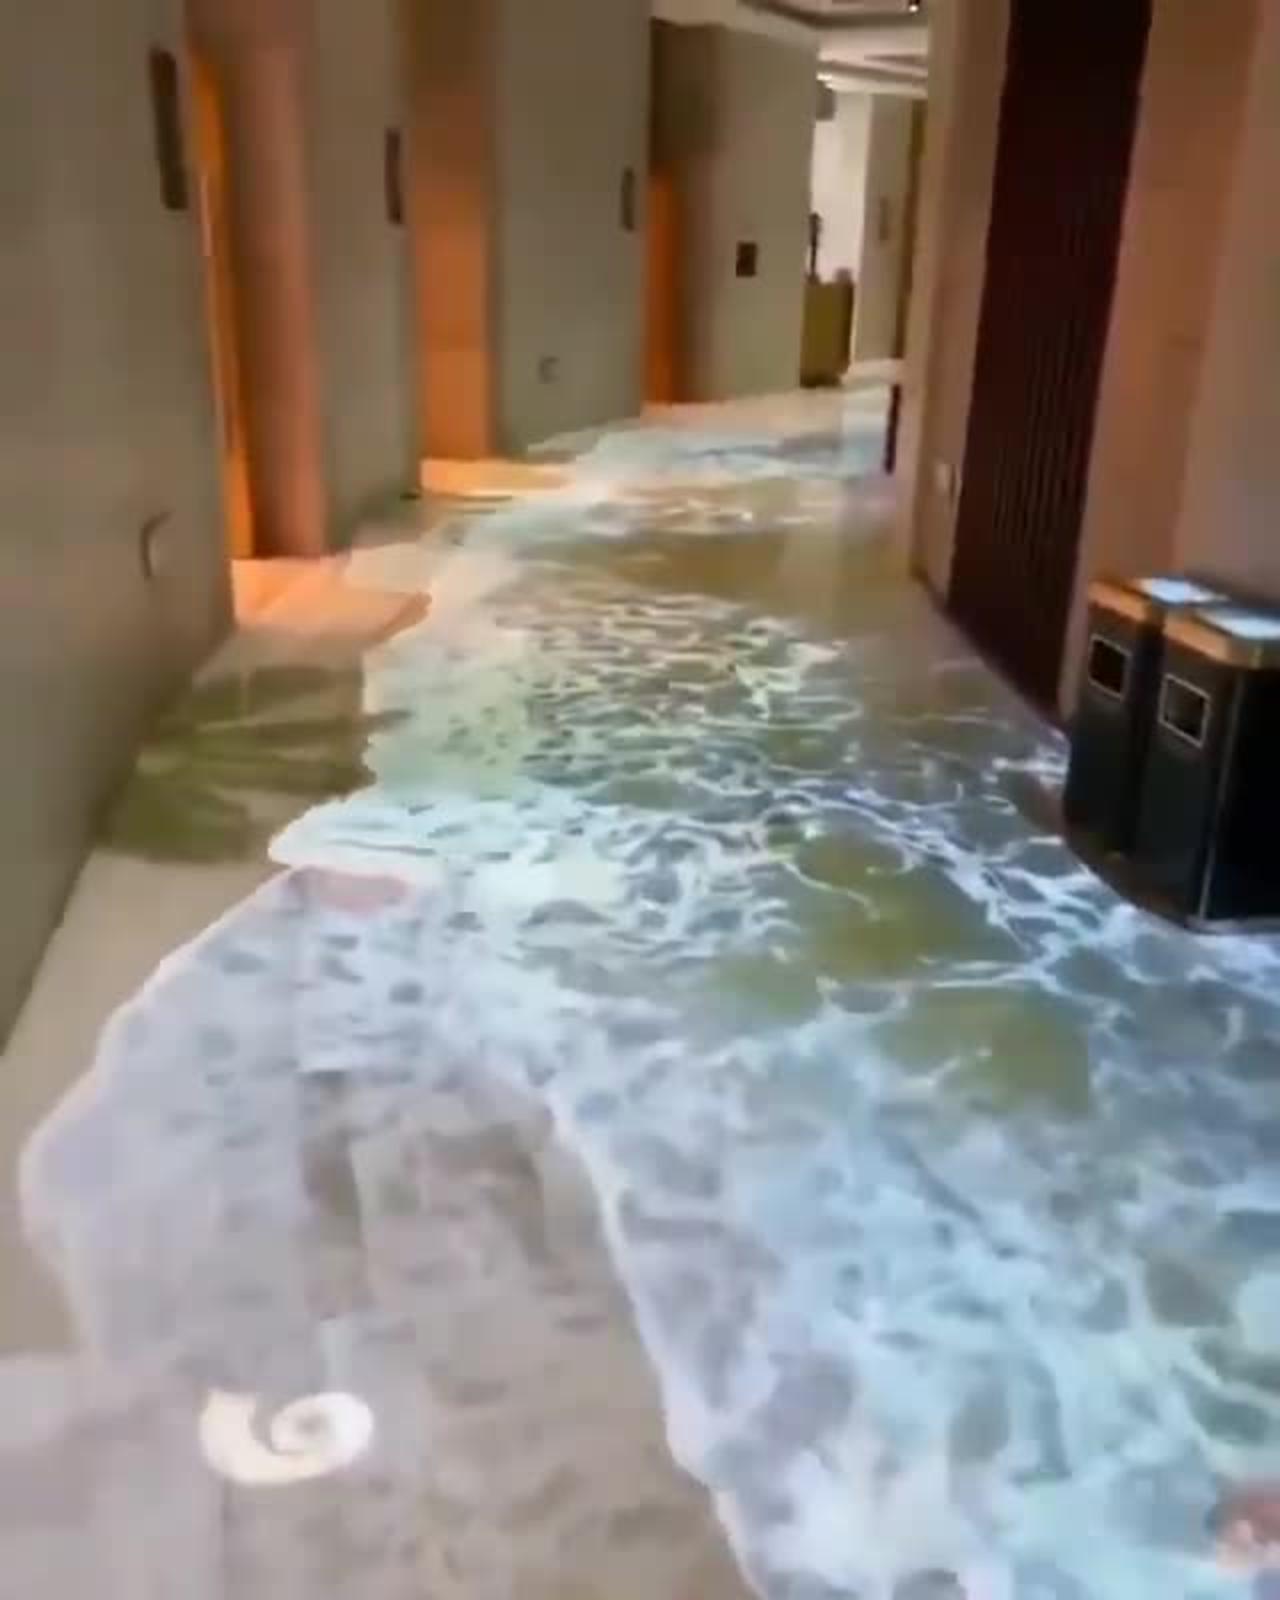 An interesting hotel in Singapore with 3D flooring 😃